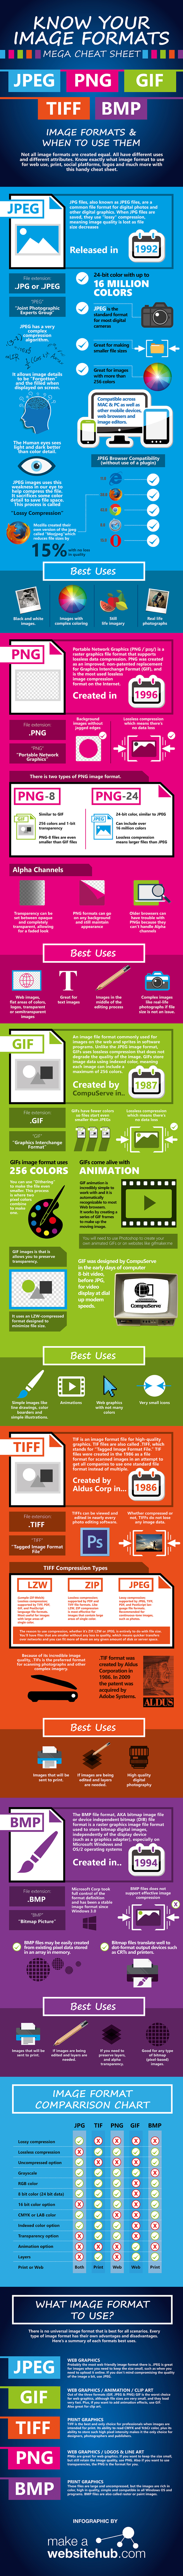 Know Your Image Formats Mega Cheat Sheet infographic